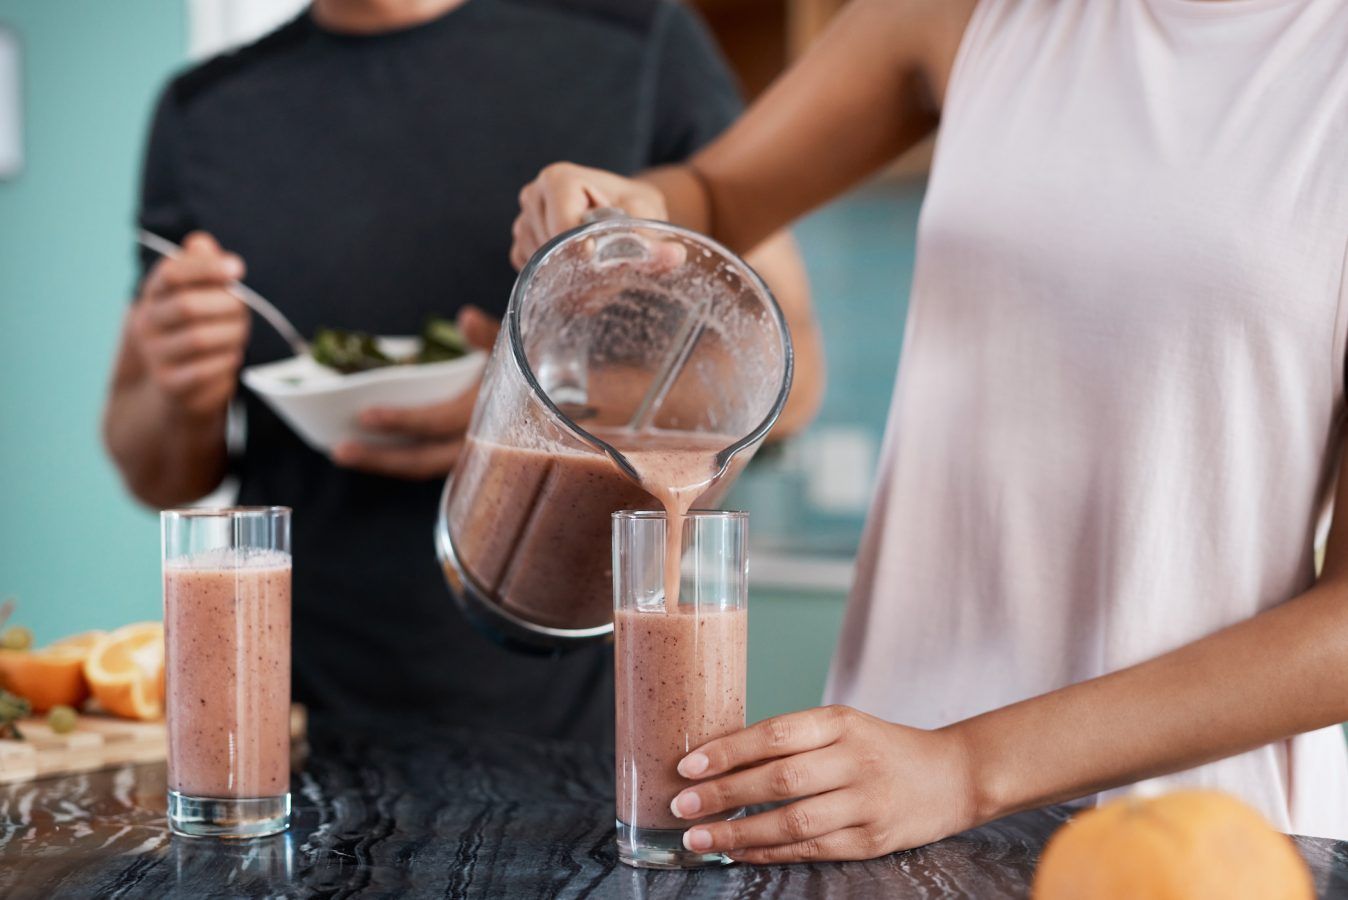 Are Smoothies Healthy? Are They Good for Weight Loss?